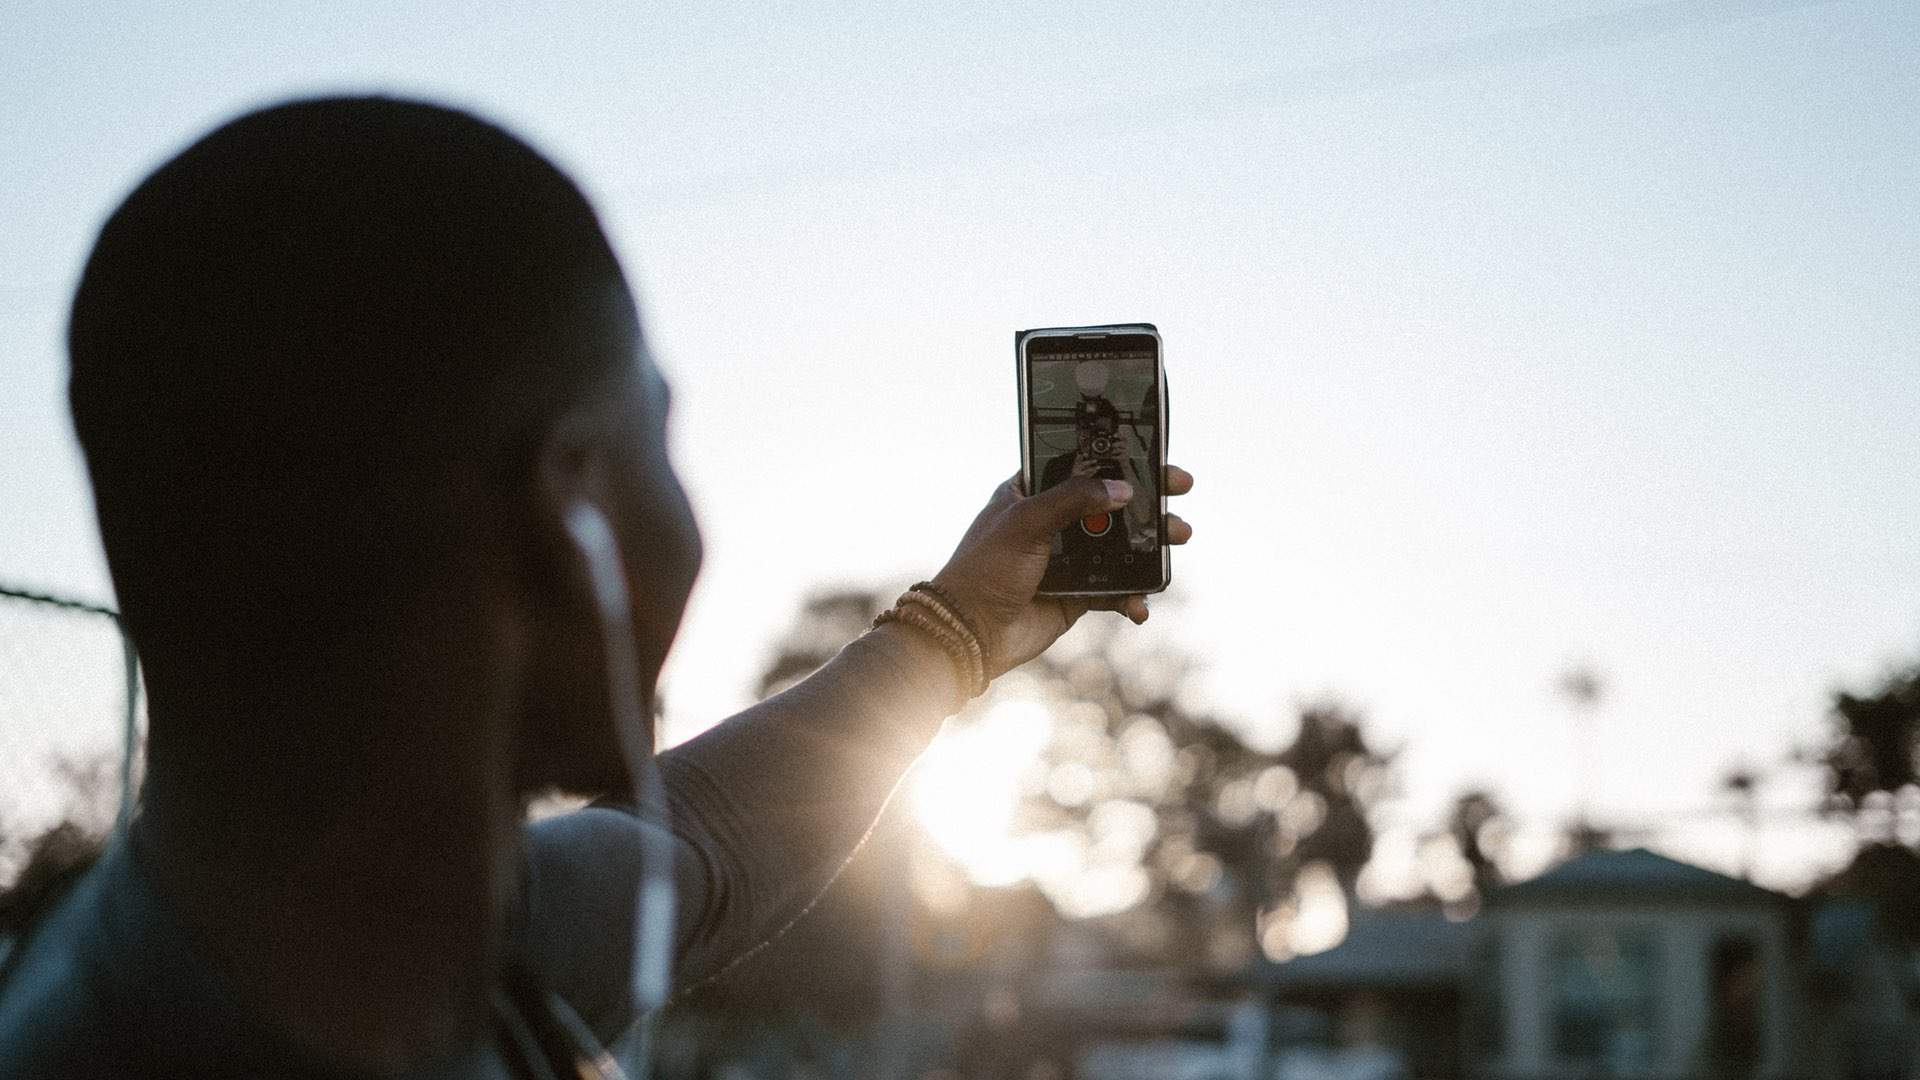 This Study Suggests Excessive Selfie-Taking Could be an Actual Mental Disorder